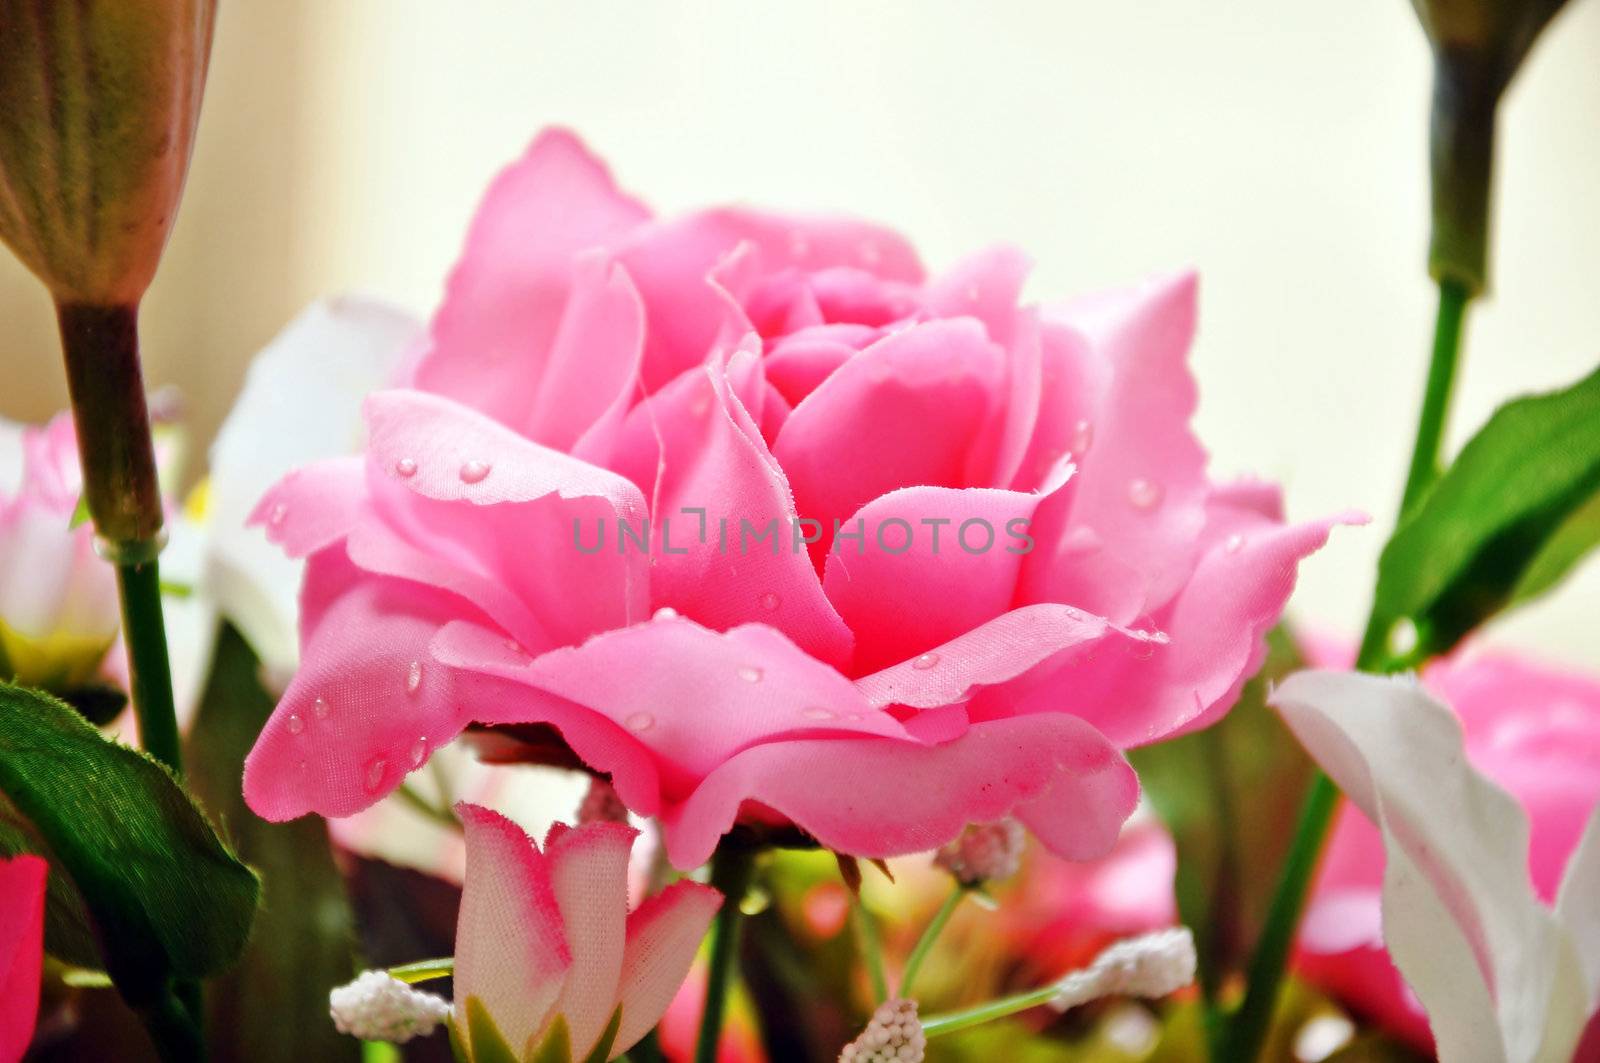 Artificial flowers are imitations of natural flowering plants, used for commercial or residential decoration.